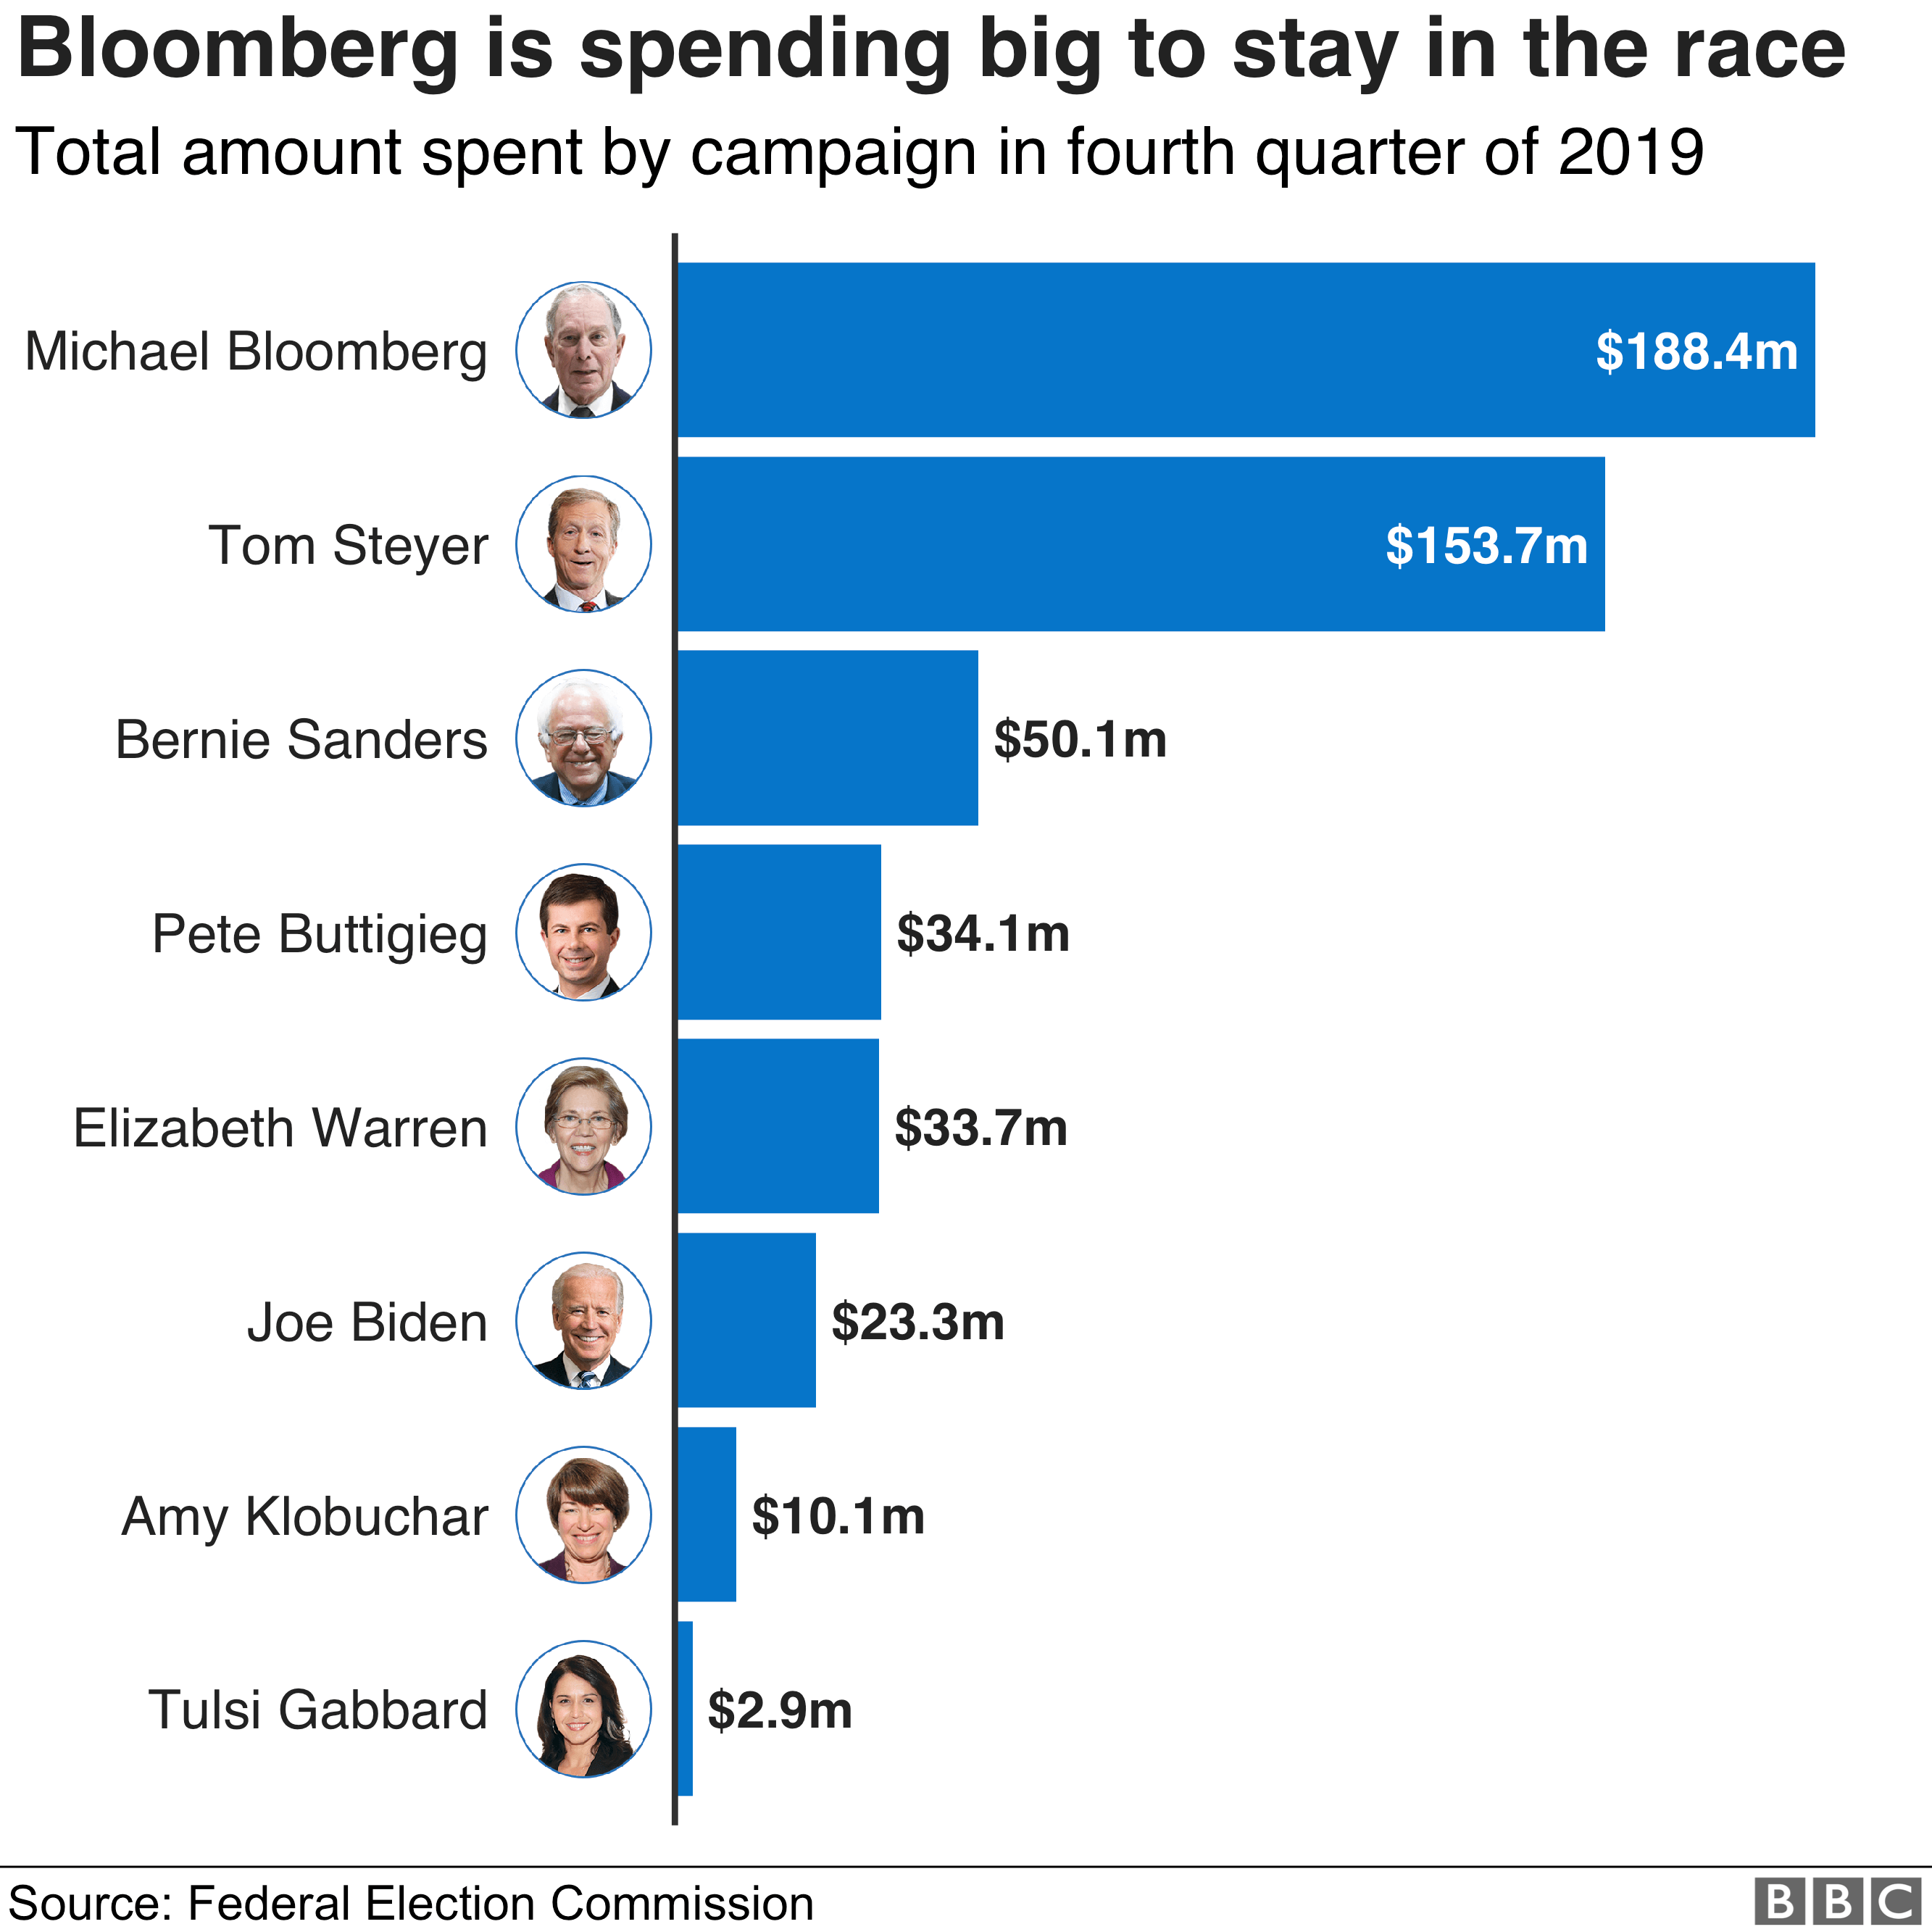 Chart showing the total amount spent by each campaign in the fourth quarter of 2019